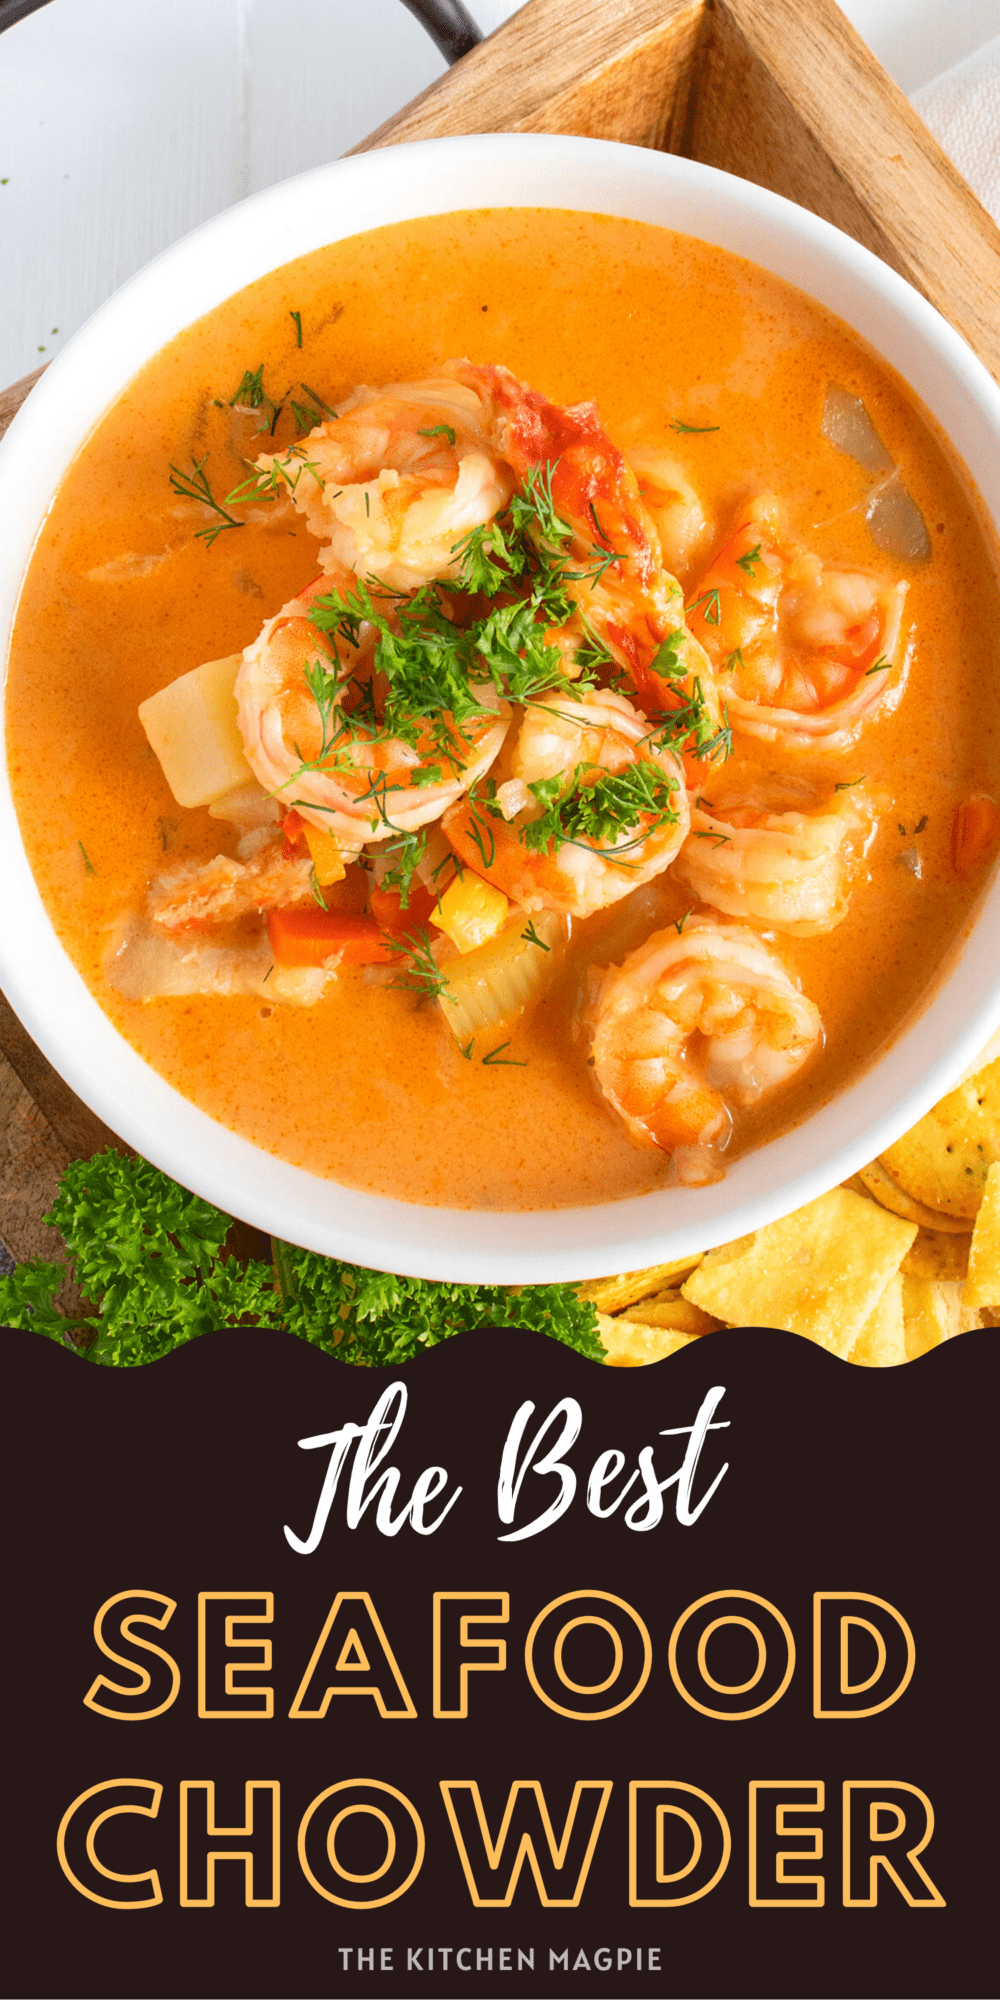 Rich, filling, and flavorful seafood chowder made with homemade seafood stock. The perfect meal for seafood lovers!